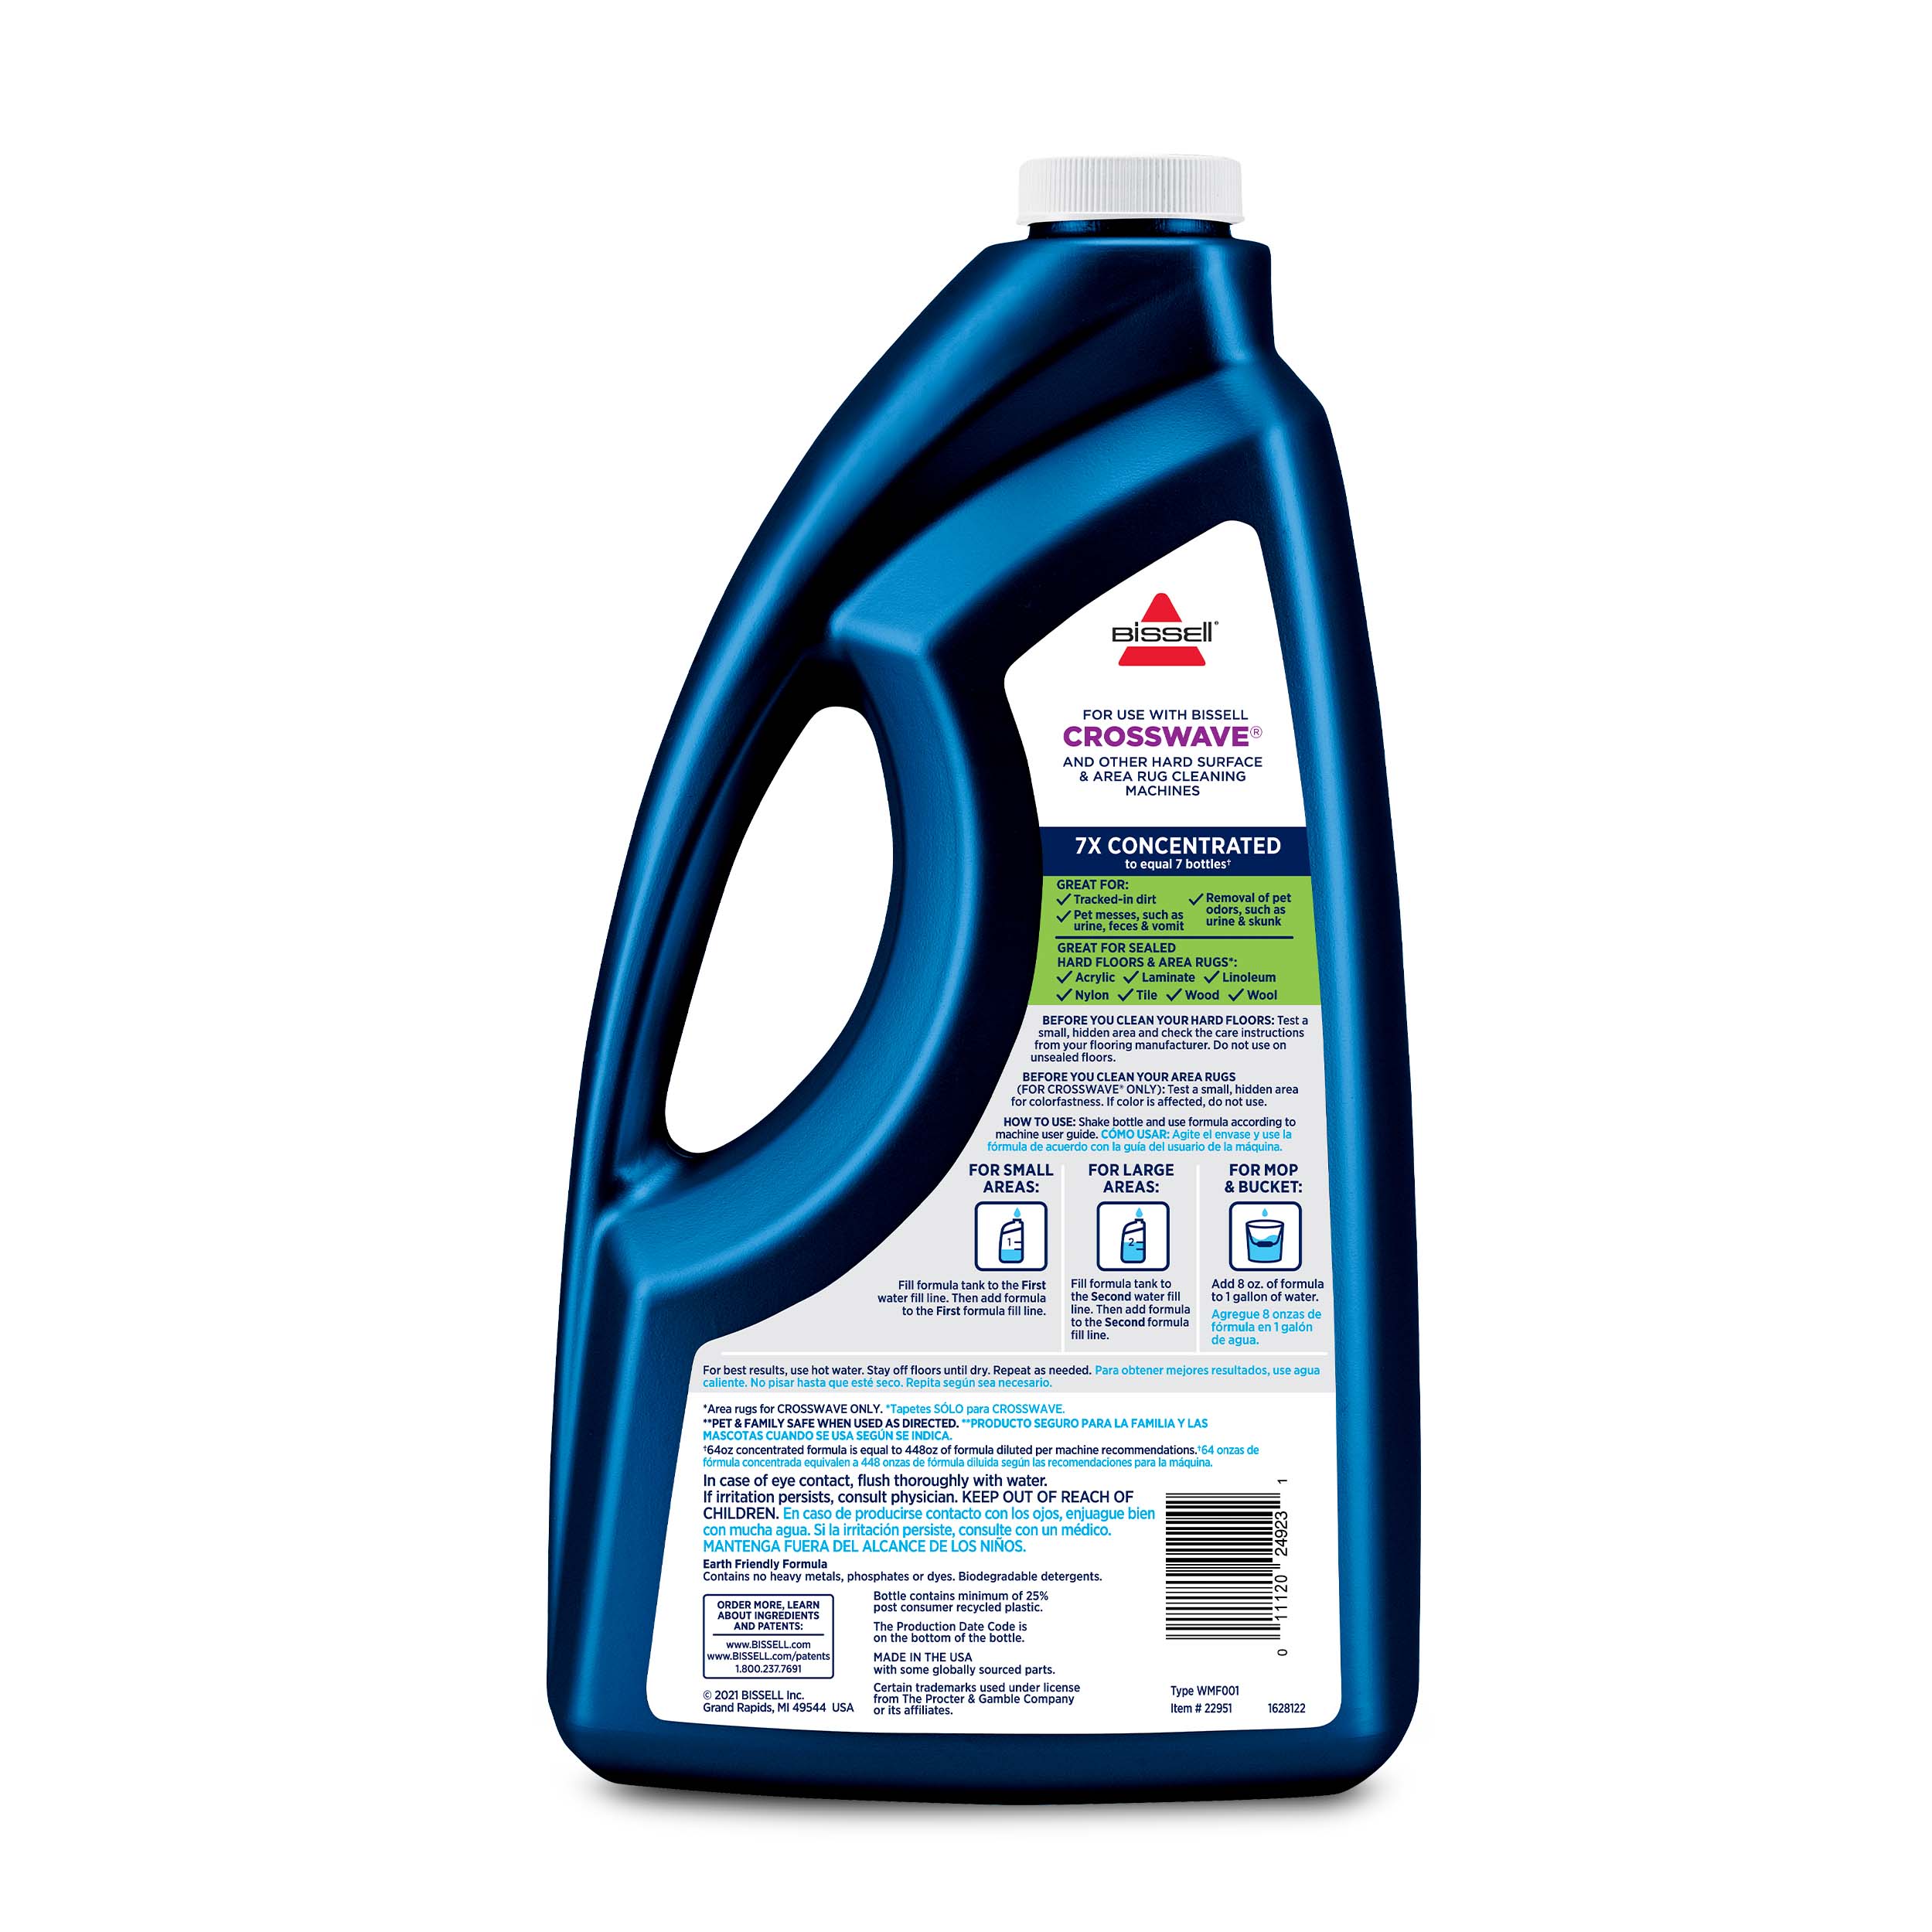 BISSELL Surface Cleaners, Febreze Scent, 64 Fluid Ounce 22951 - image 2 of 8